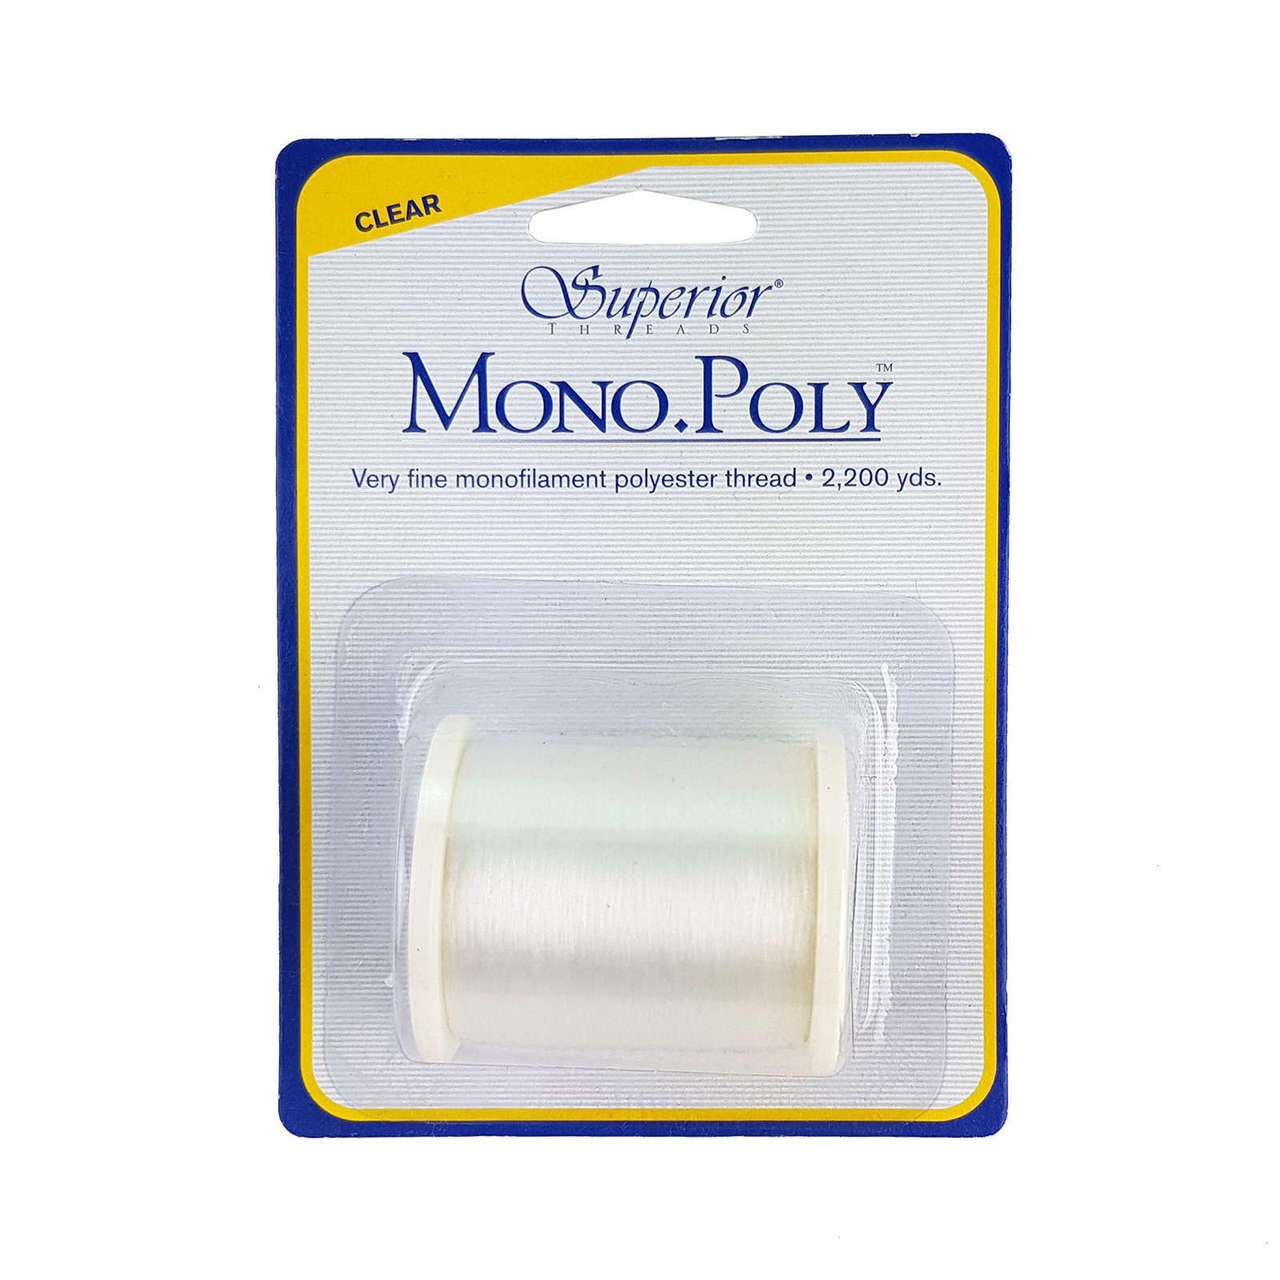 Mono Poly Monofilament Polyester Thread Very Fine, Clear, 2,200